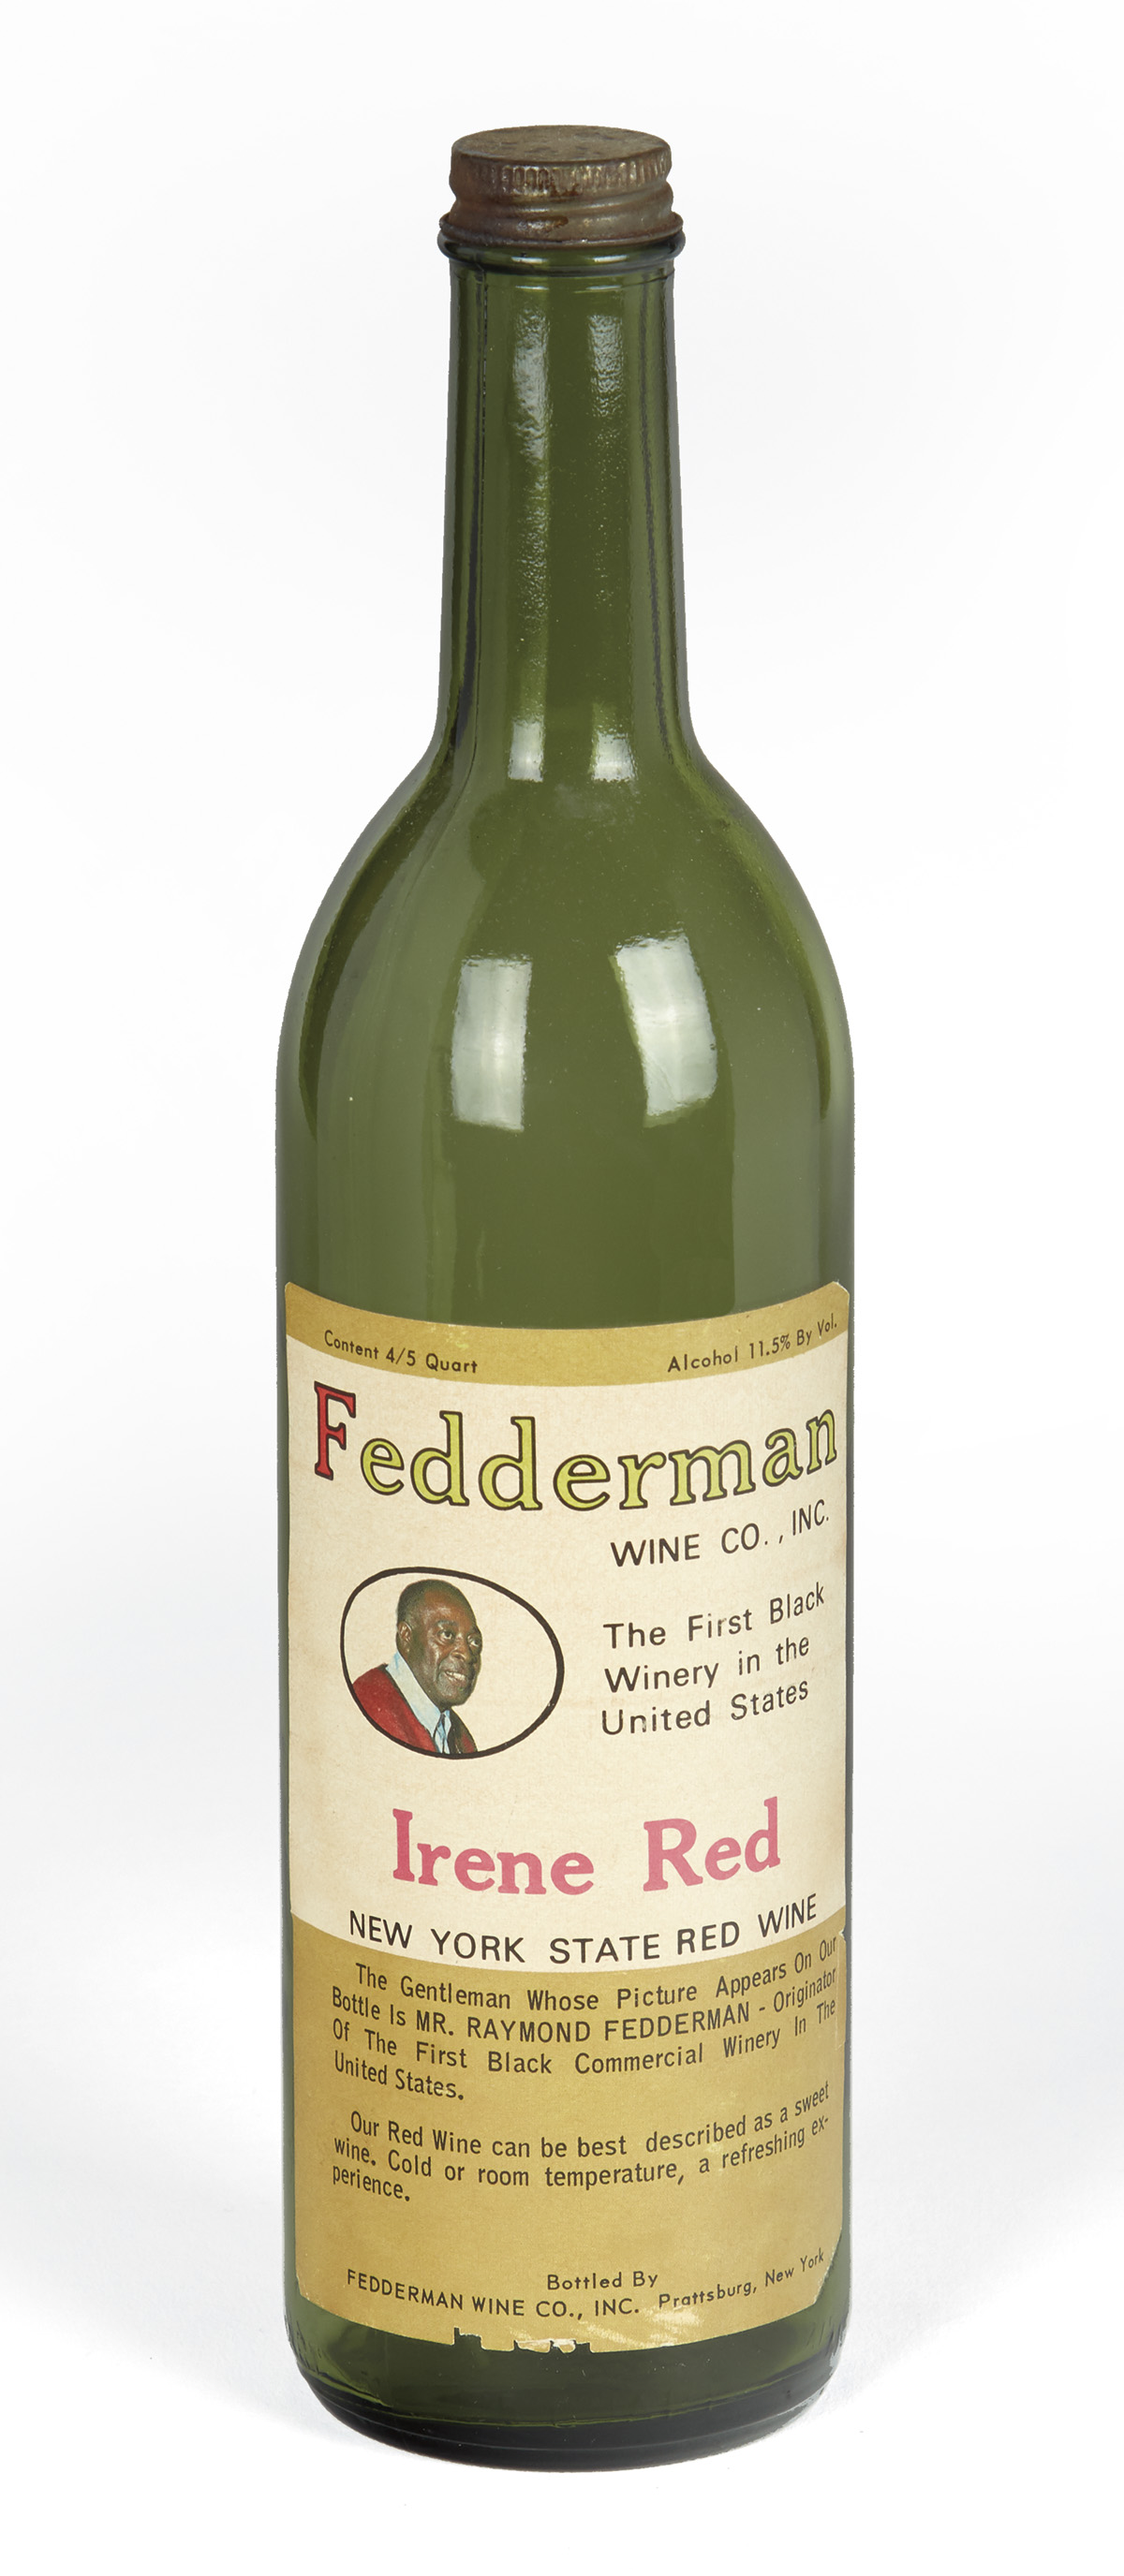 (BUSINESS.) Original bottle and advertisement from the Fedderman Wine Co., the first black winery in the United States.